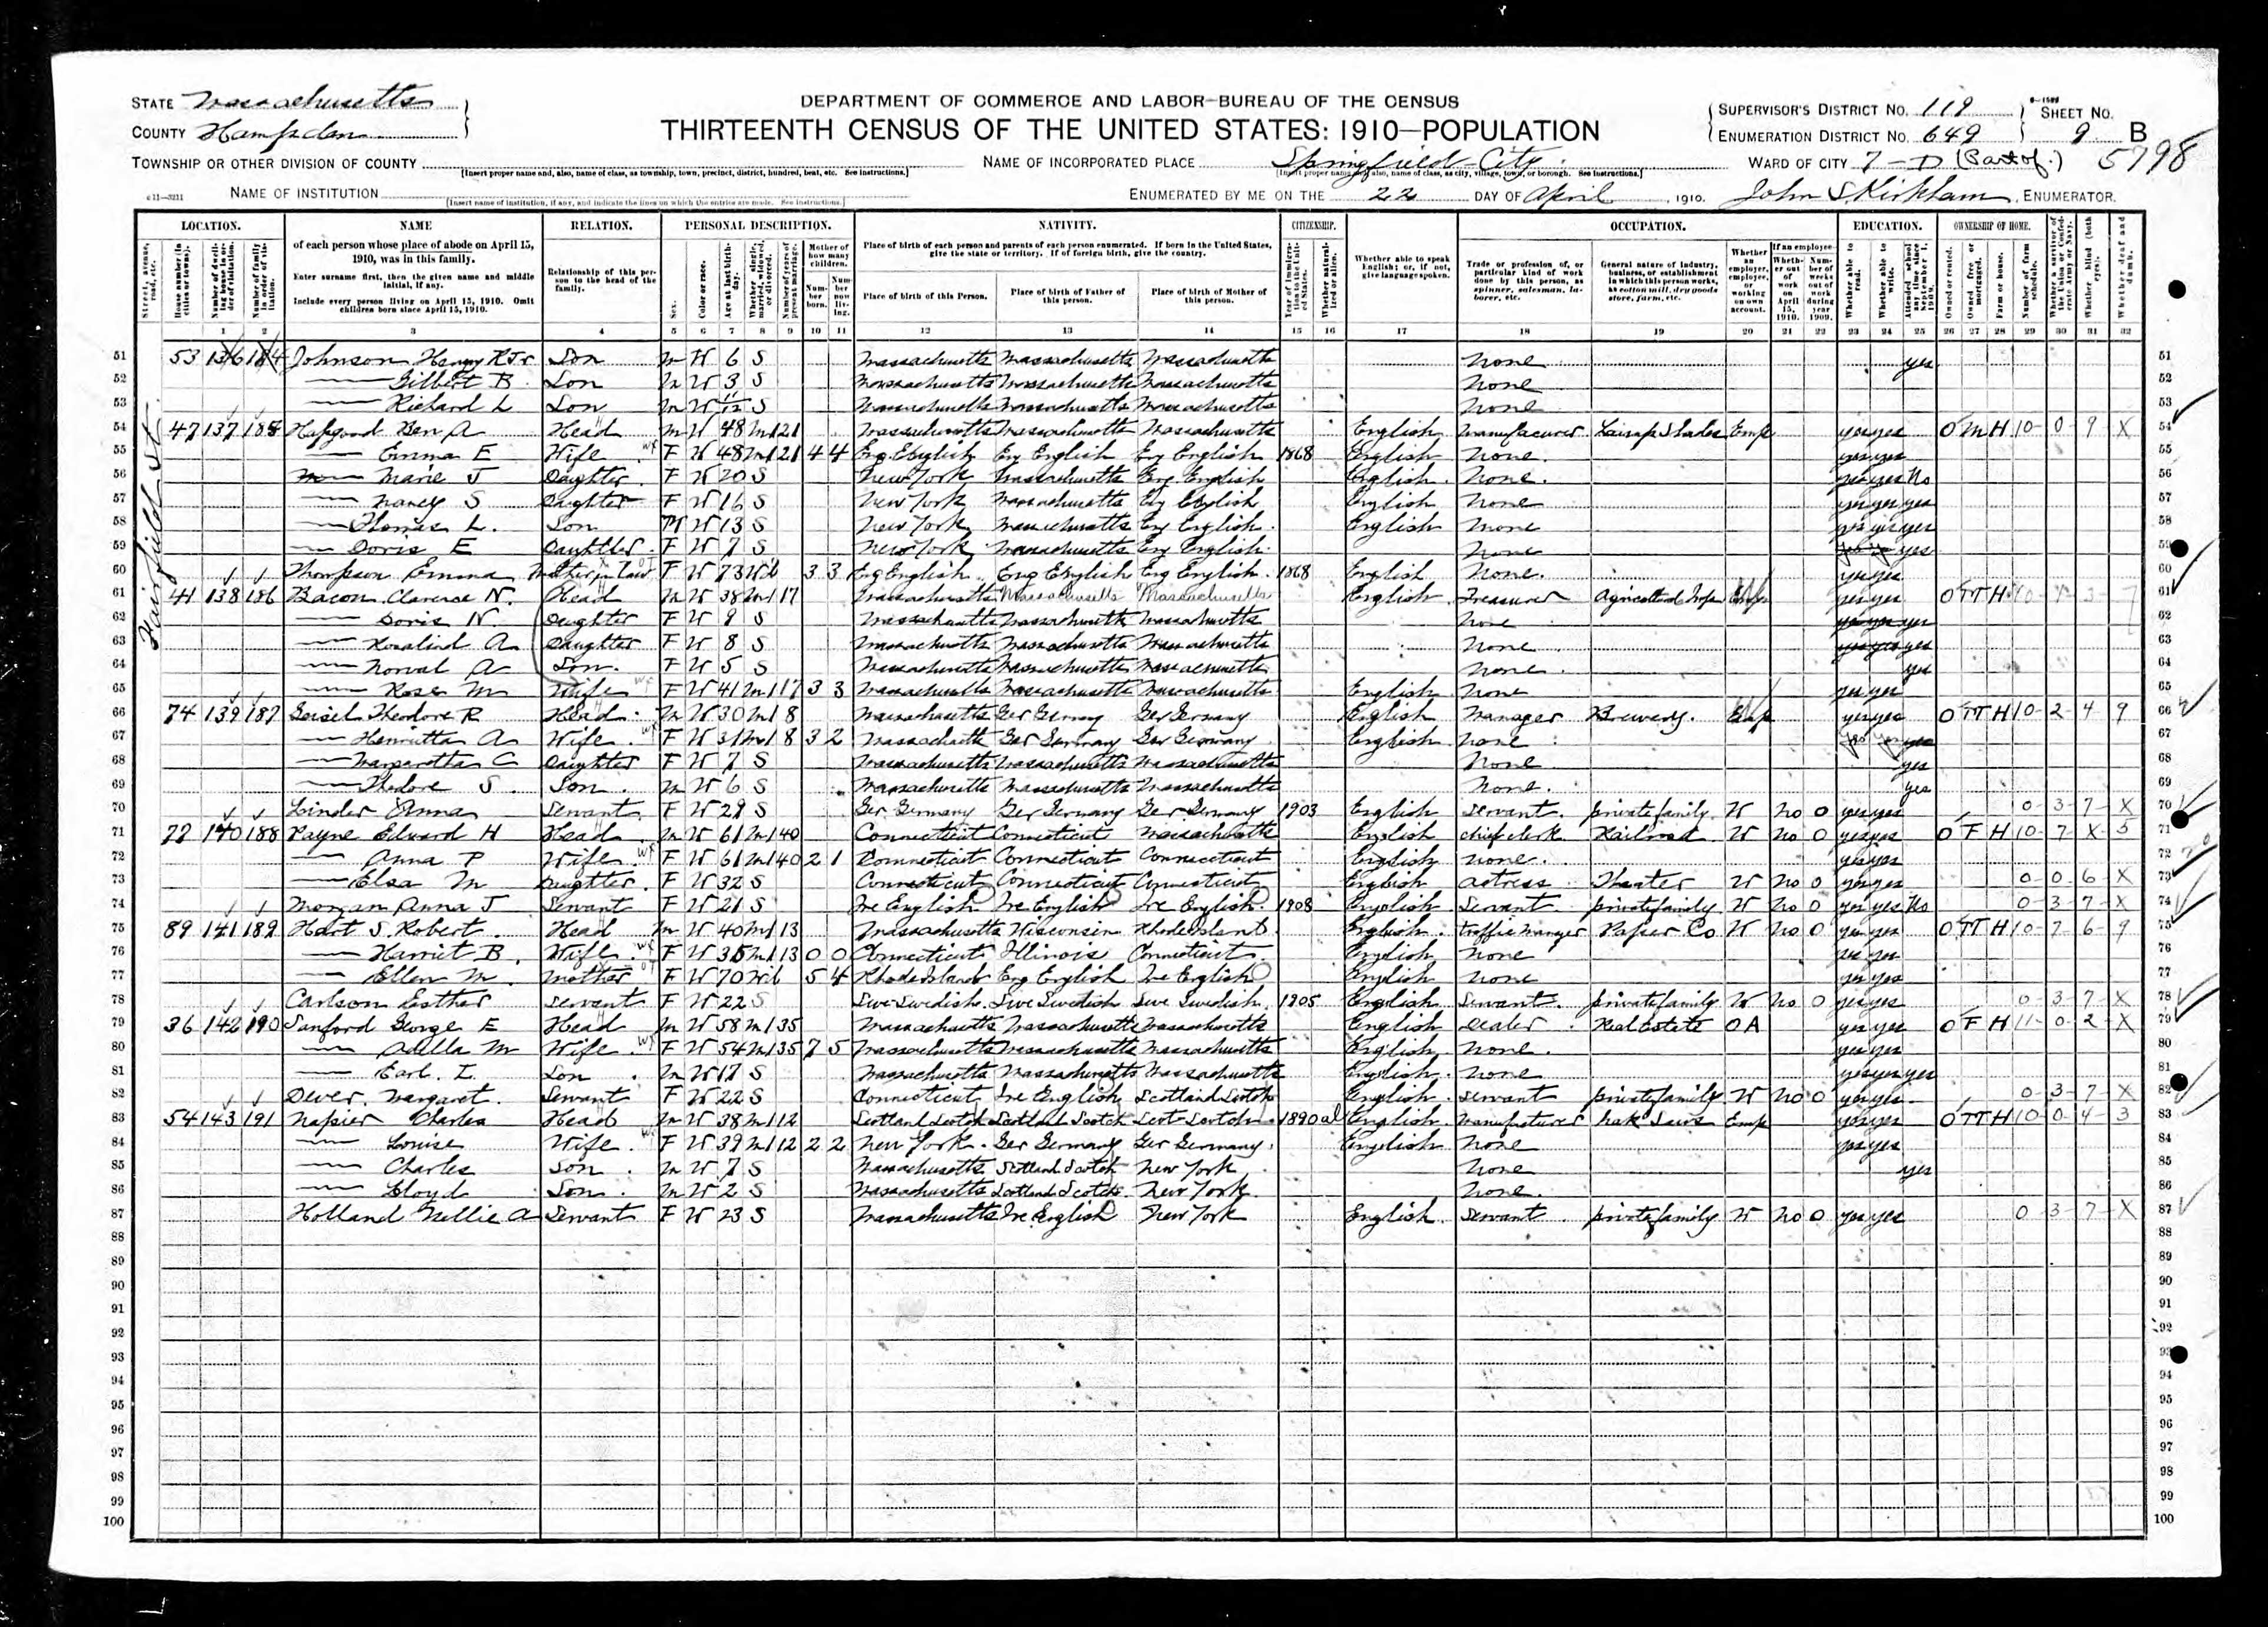 Black and white scan of handwritten 1910 census record.